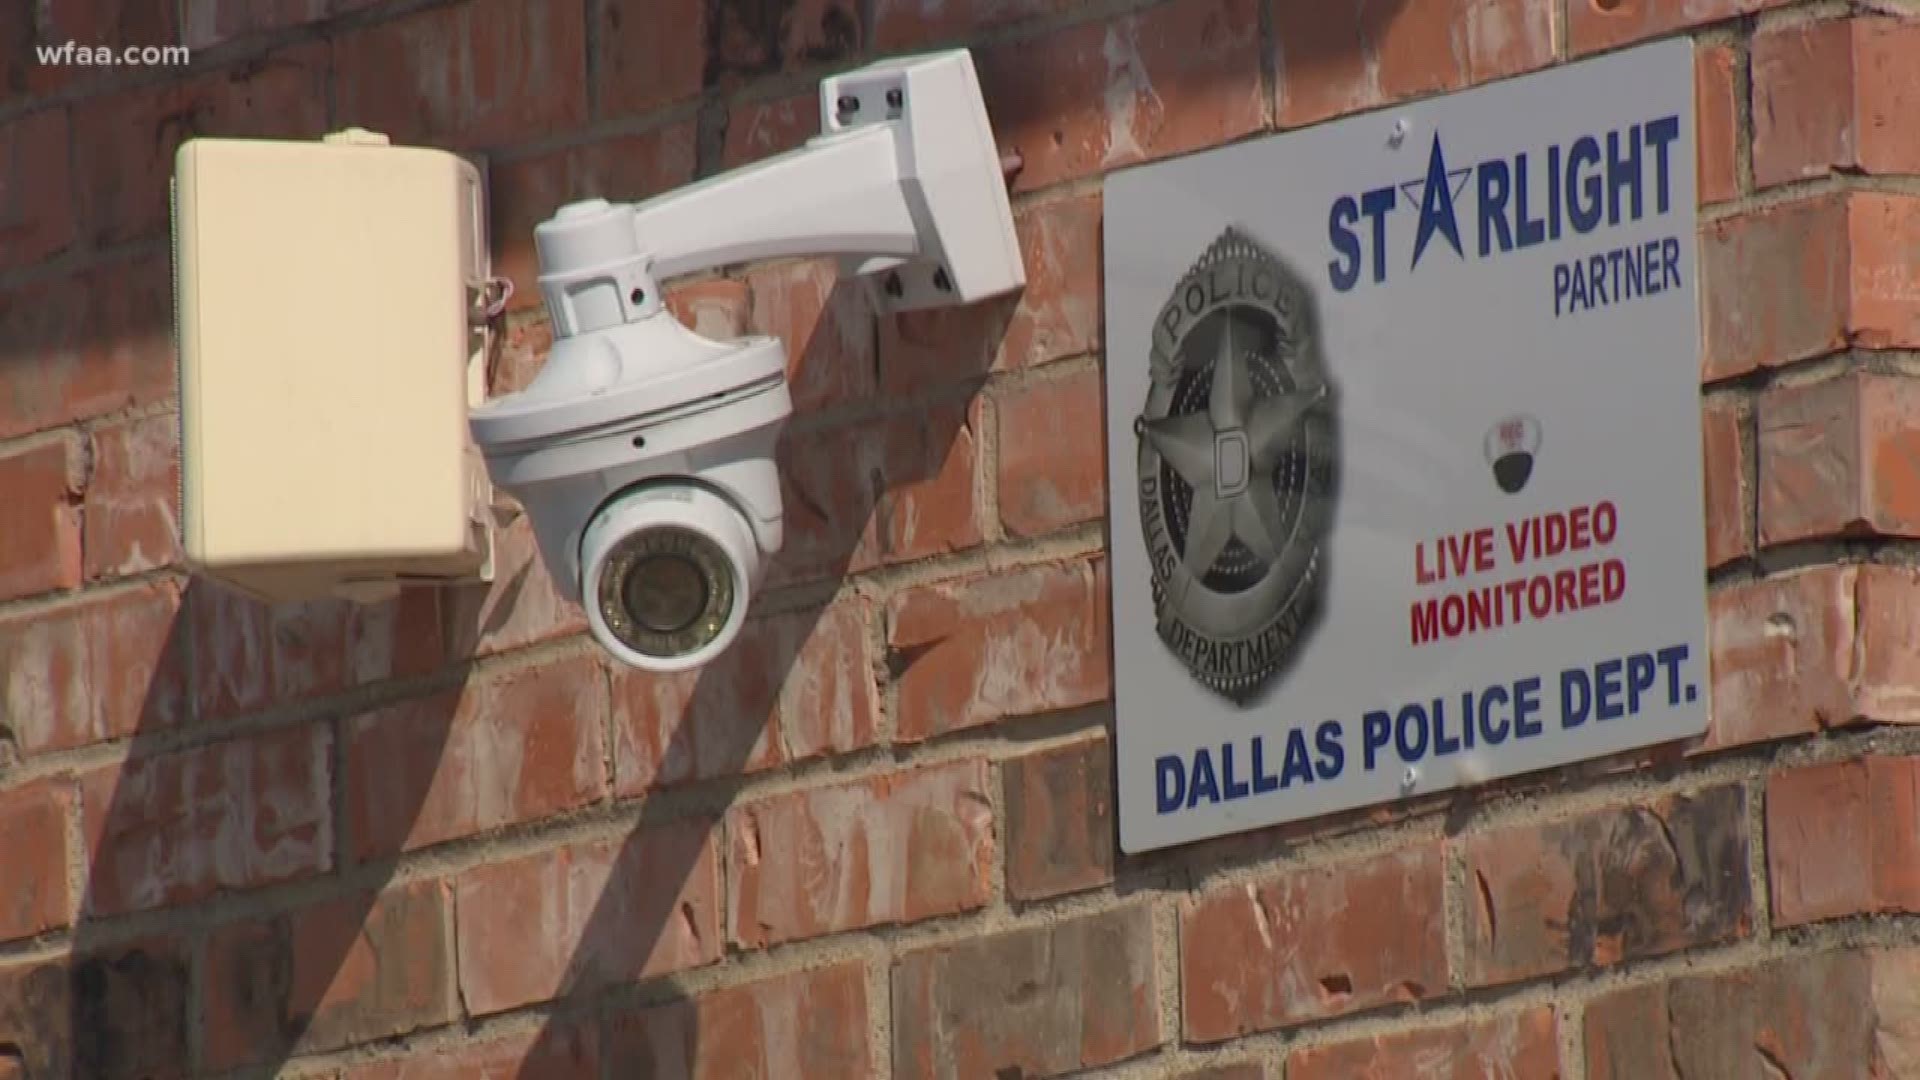 The Starlight initiative allows police to monitor cameras and crimes happening in real-time near some local businesses.